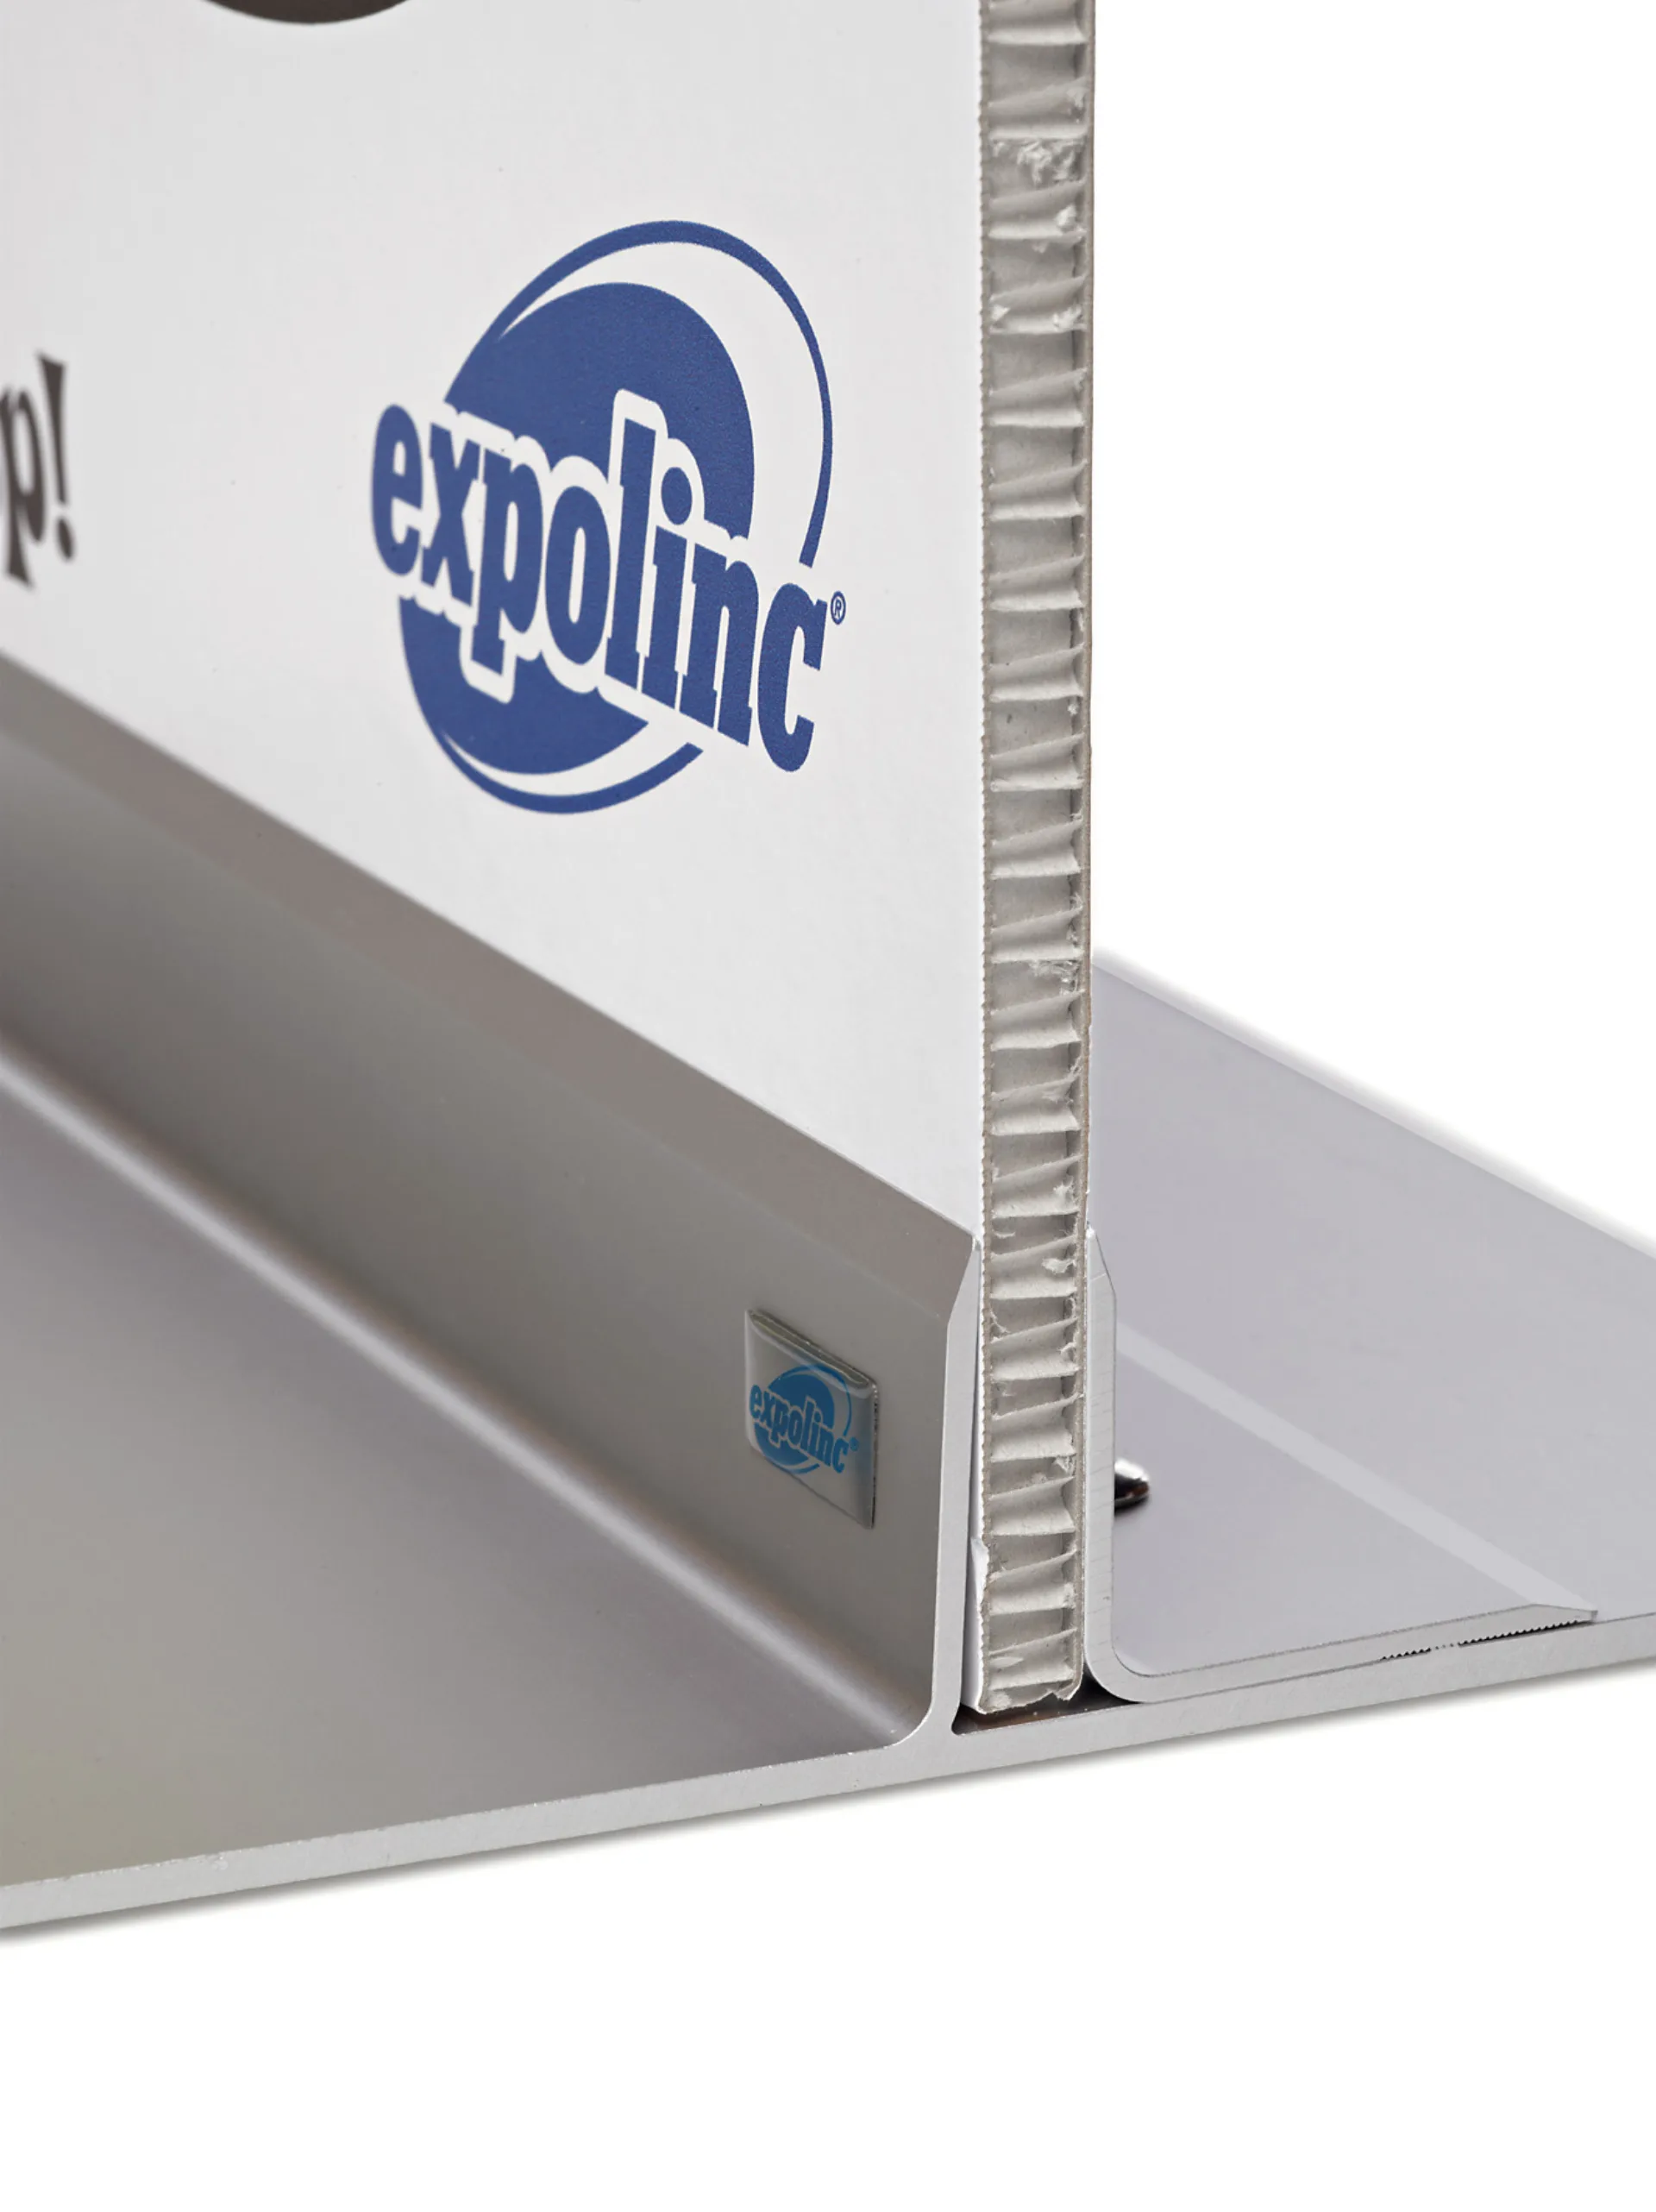 Expolinc Panel Base - side front view